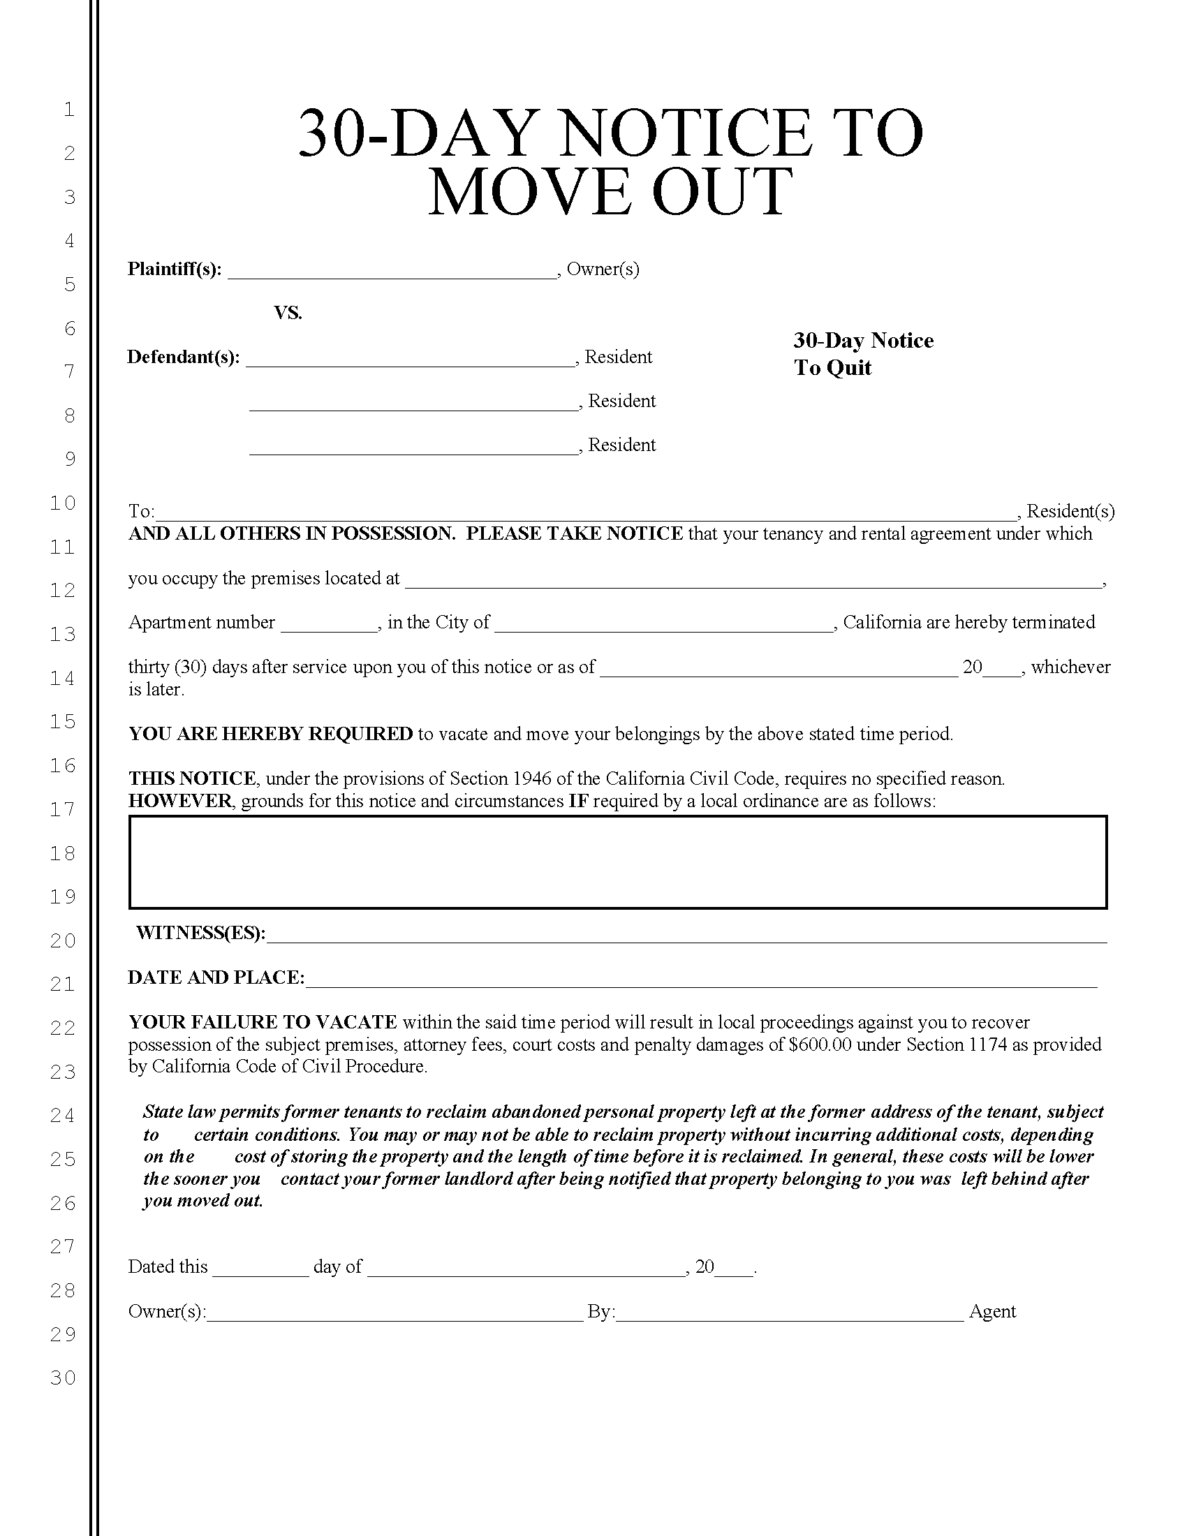 free-california-30-day-notice-to-quit-lease-termination-under-1-year-pdf